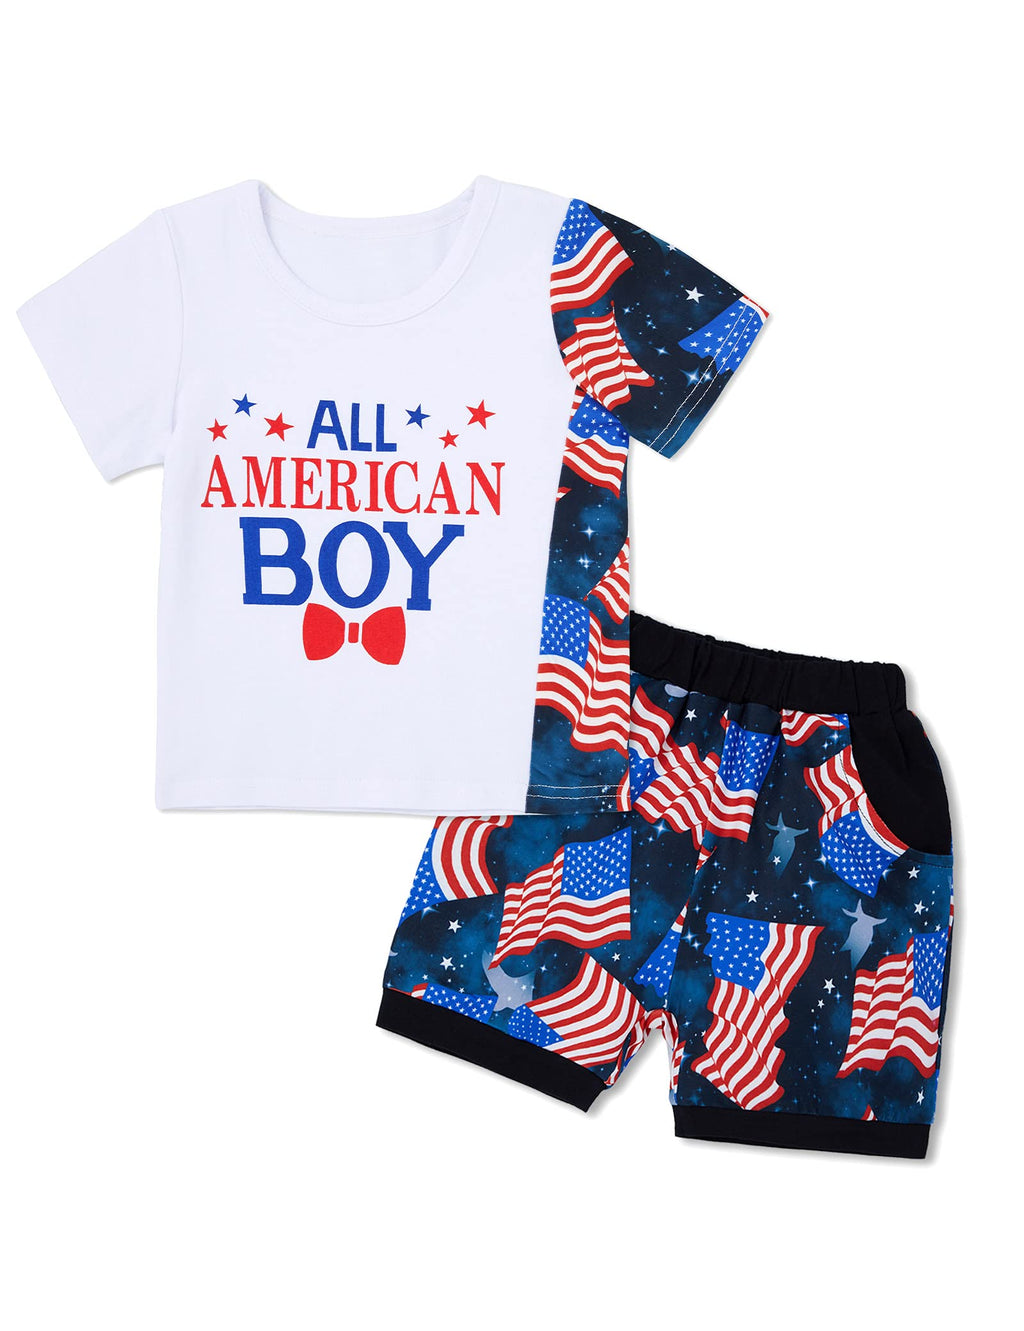 [Australia] - Baby Boy Clothes Summer Outfits, Newborn Infant Toddler Boy Short Sleeves + Shorts Boy Outfits Sets White 18-24M 